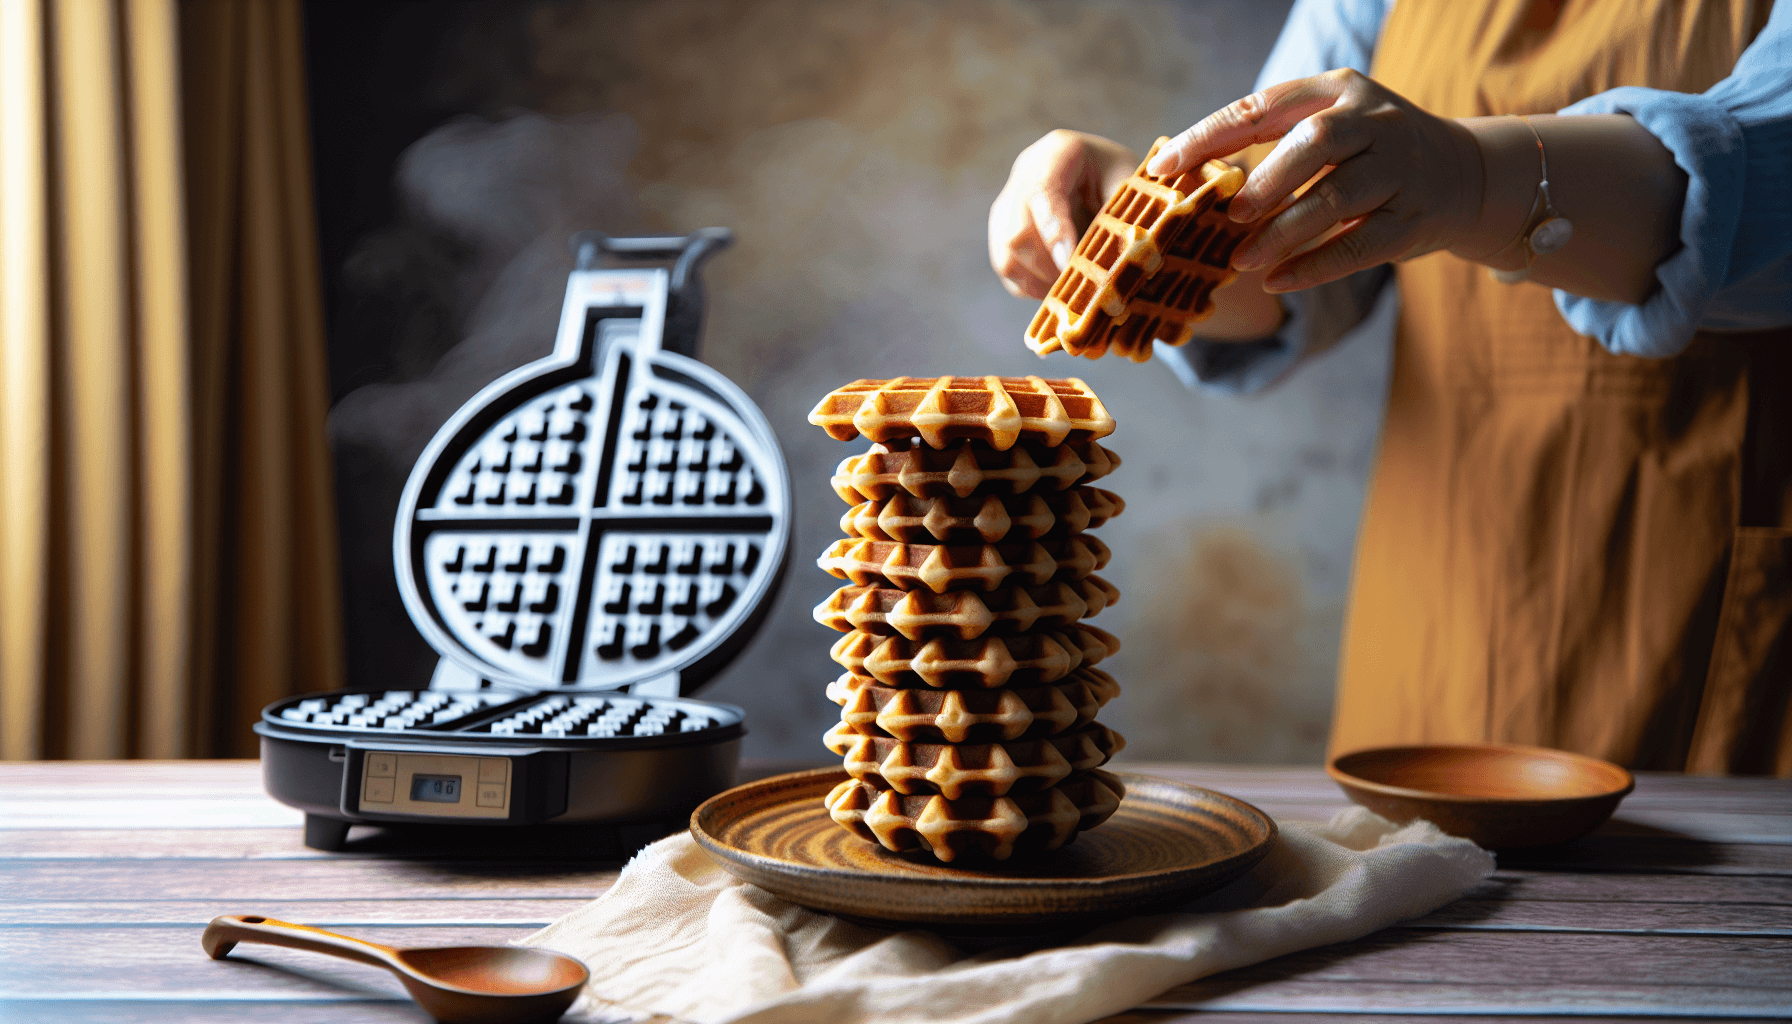 Warm waffles being stacked on a plate